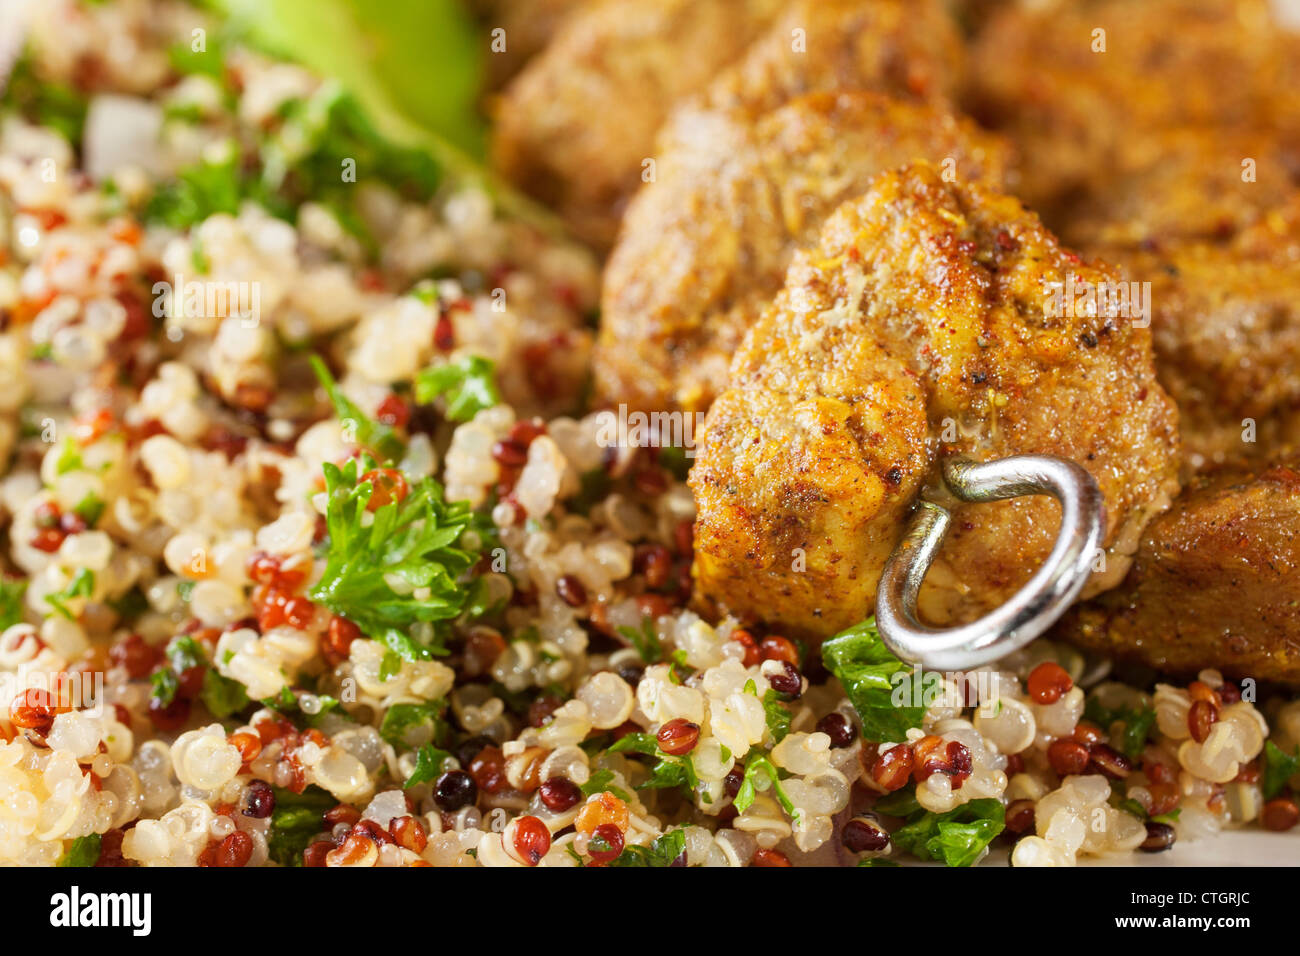 Spicy kebab with quinoa salad. Contains red, black and white quinoa, also amaranth. Shallow DOF. Stock Photo